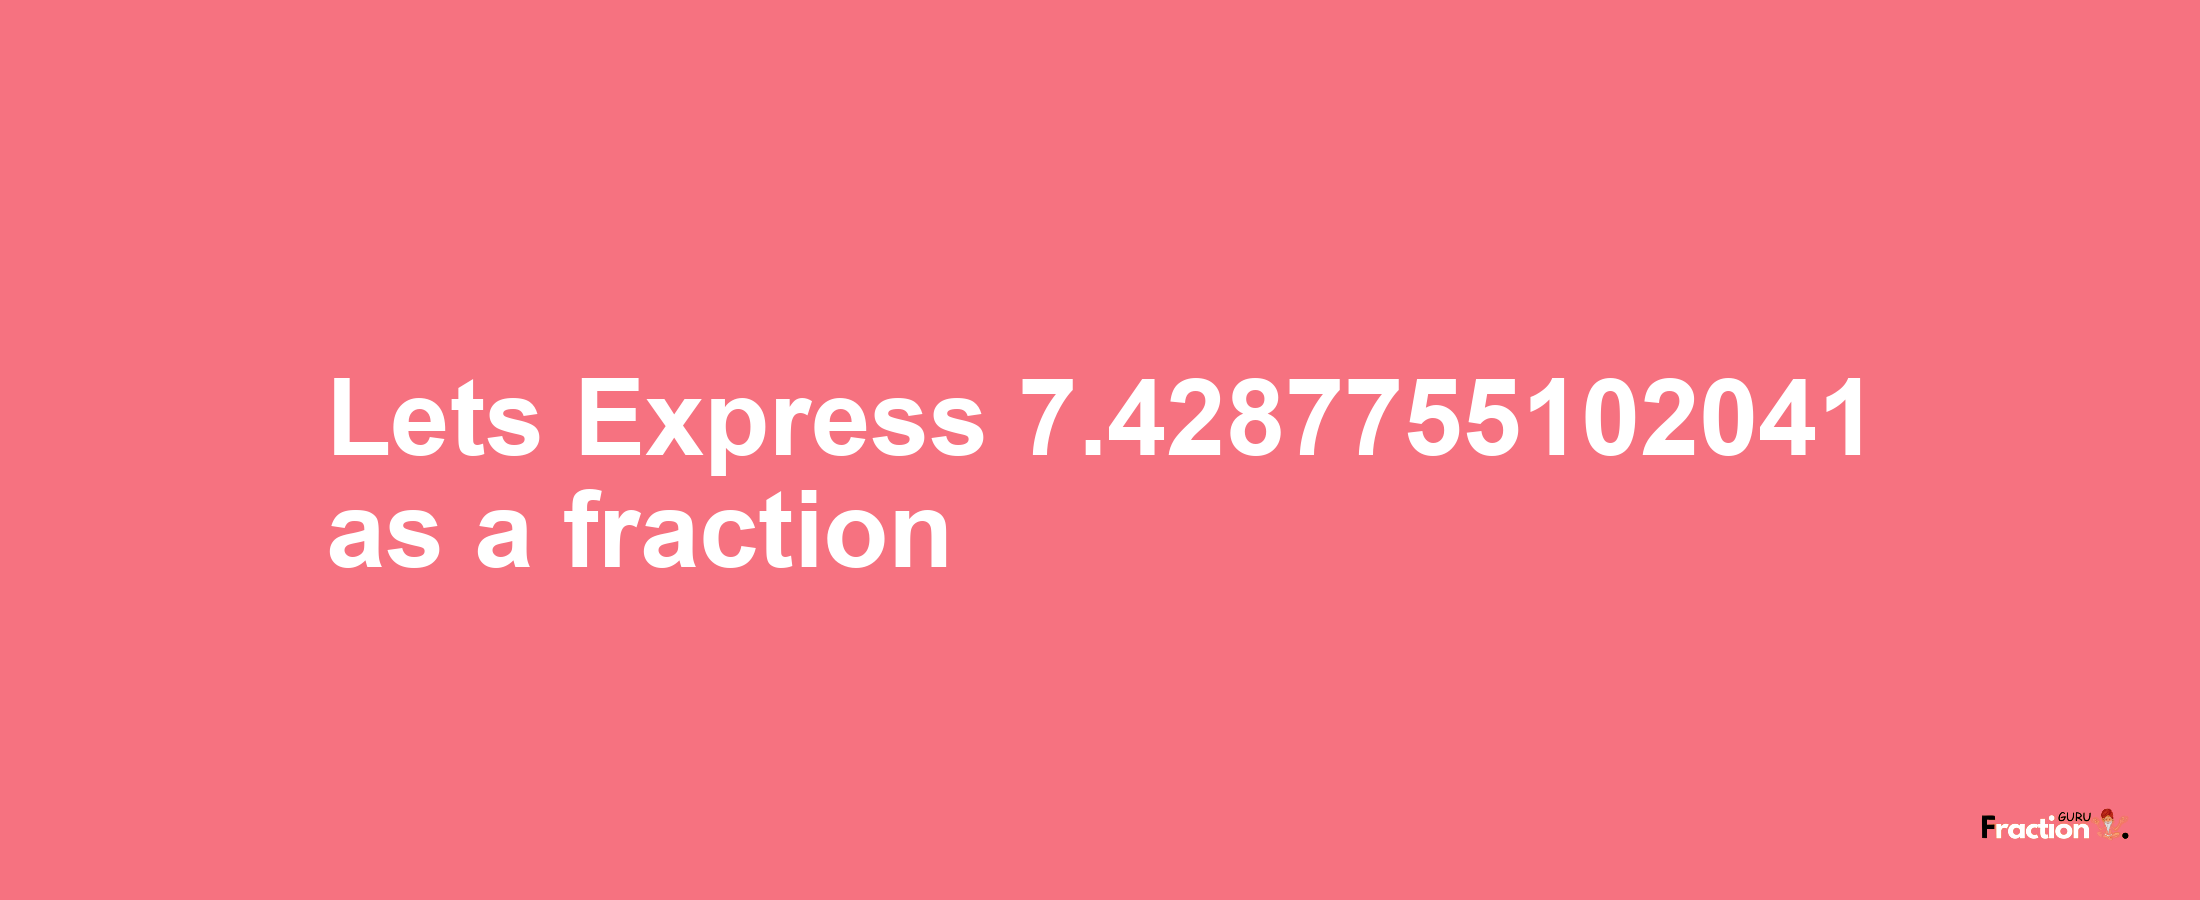 Lets Express 7.4287755102041 as afraction